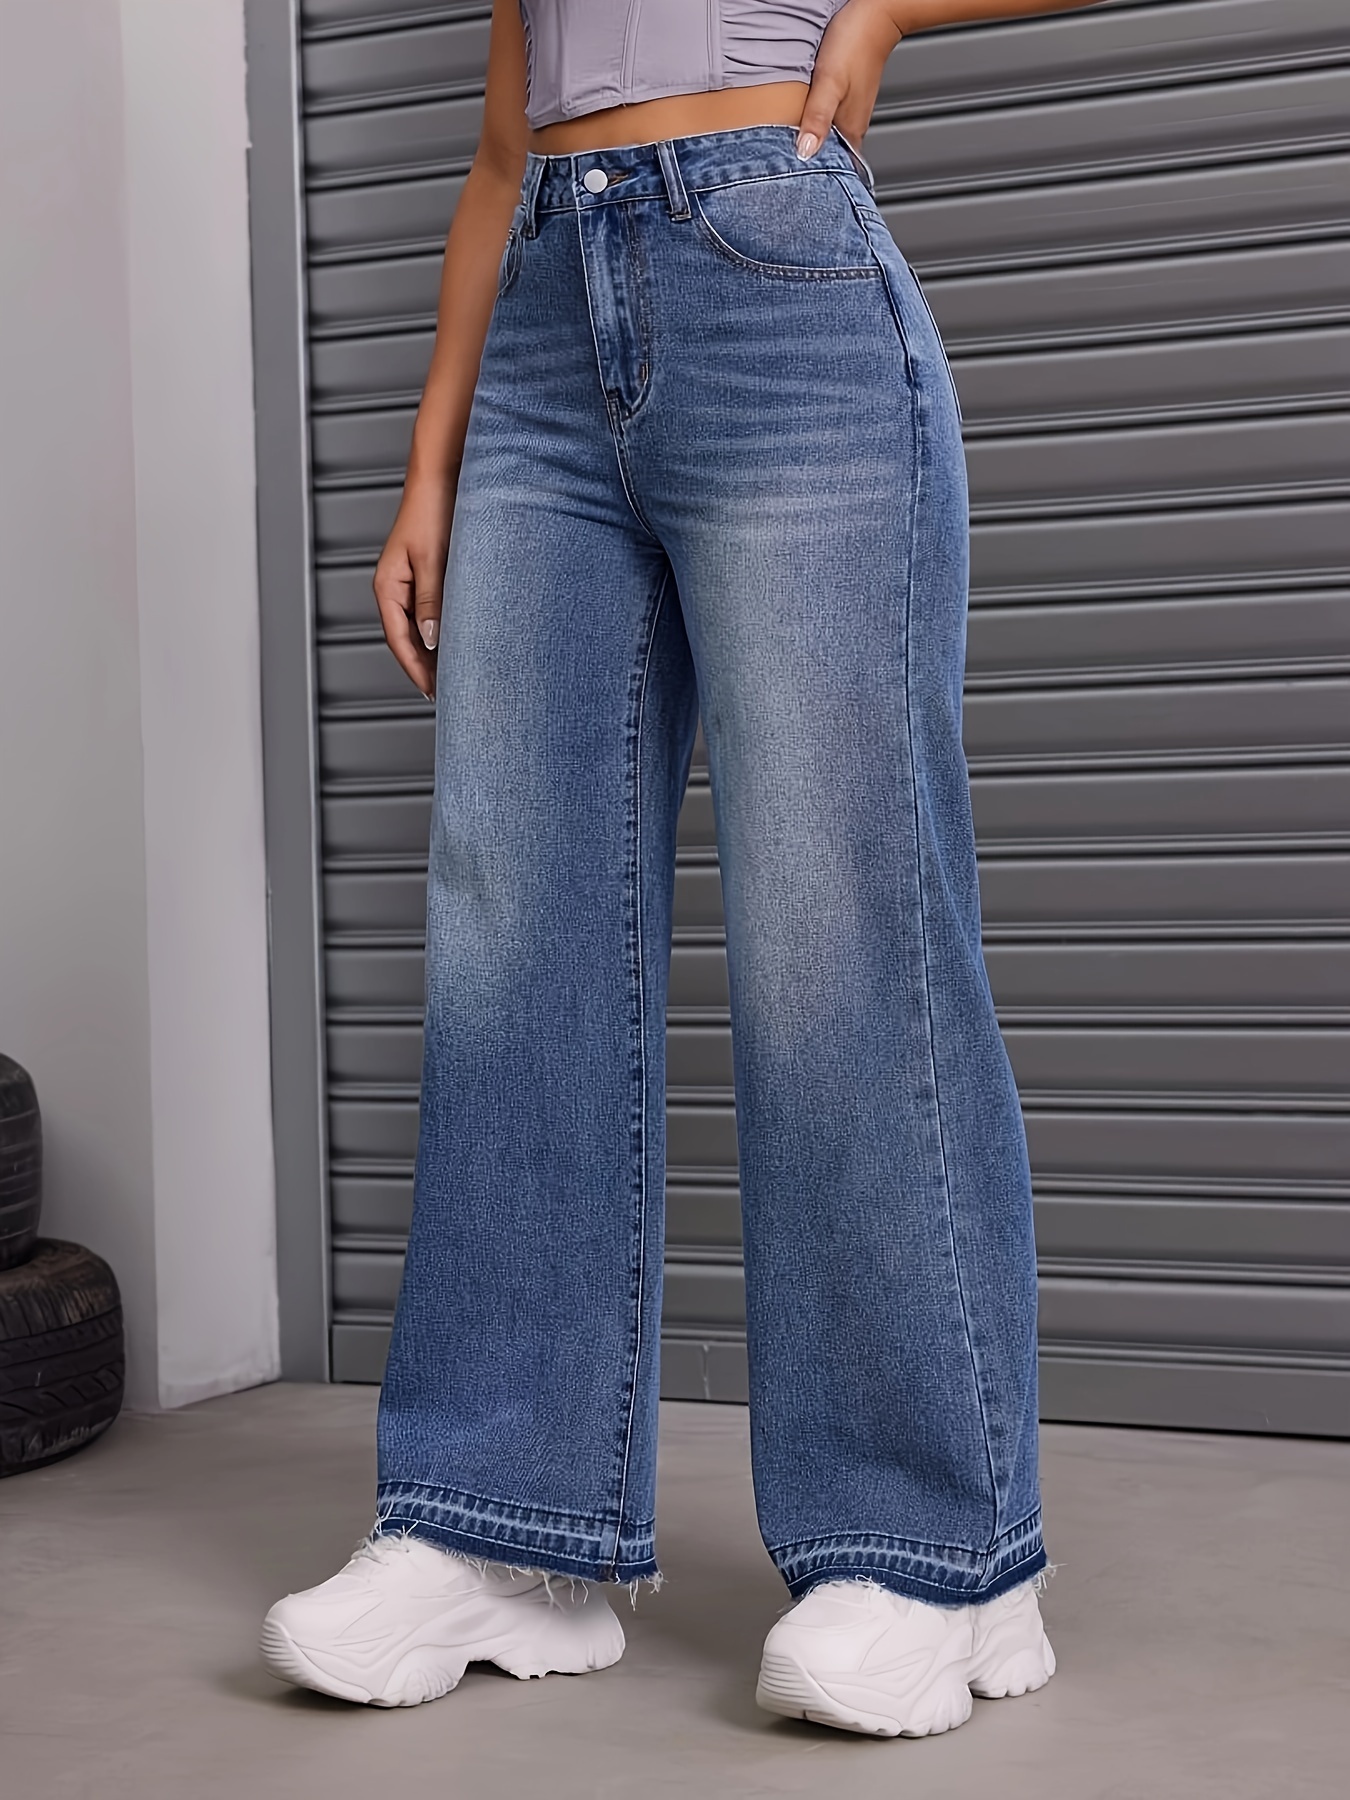 Frayed Hem Washed Baggy Jeans, High Waist Loose Fit Retro Style Wide Legs  Jeans, Women's Denim Jeans & Clothing